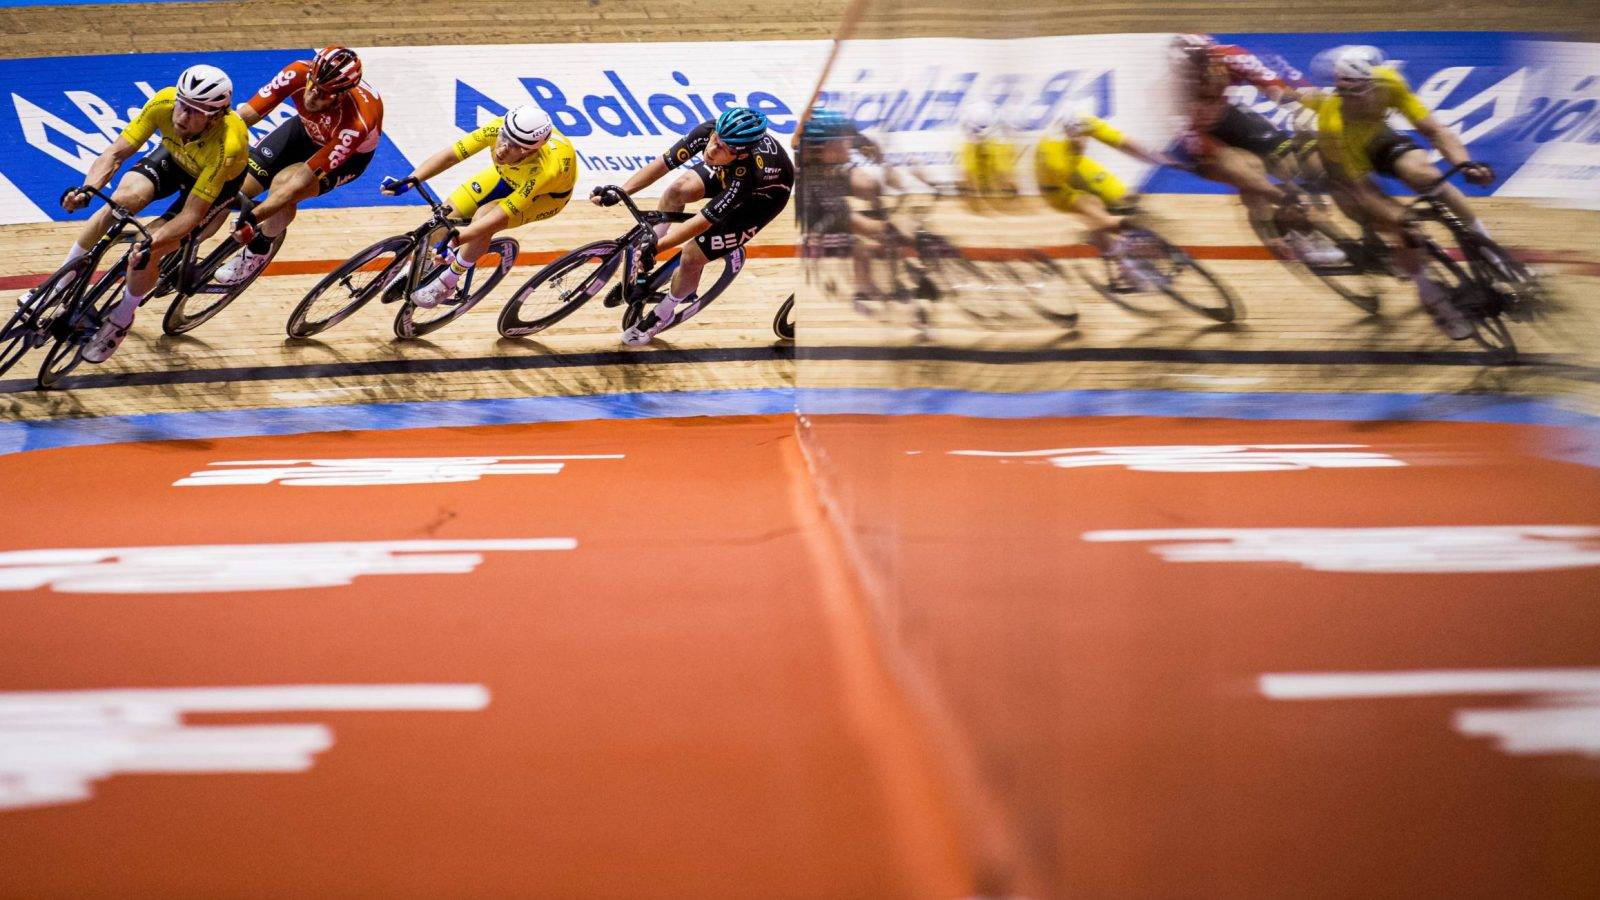 Illustration picture taken during the first day of the Zesdaagse Vlaanderen-Gent six-day indoor cycling race at the indoor cycling arena 't Kuipke, Tuesday 16 November 2021, in Gent. This year's edition takes place from November 16th until November 21st. BELGA PHOTO JASPER JACOBS